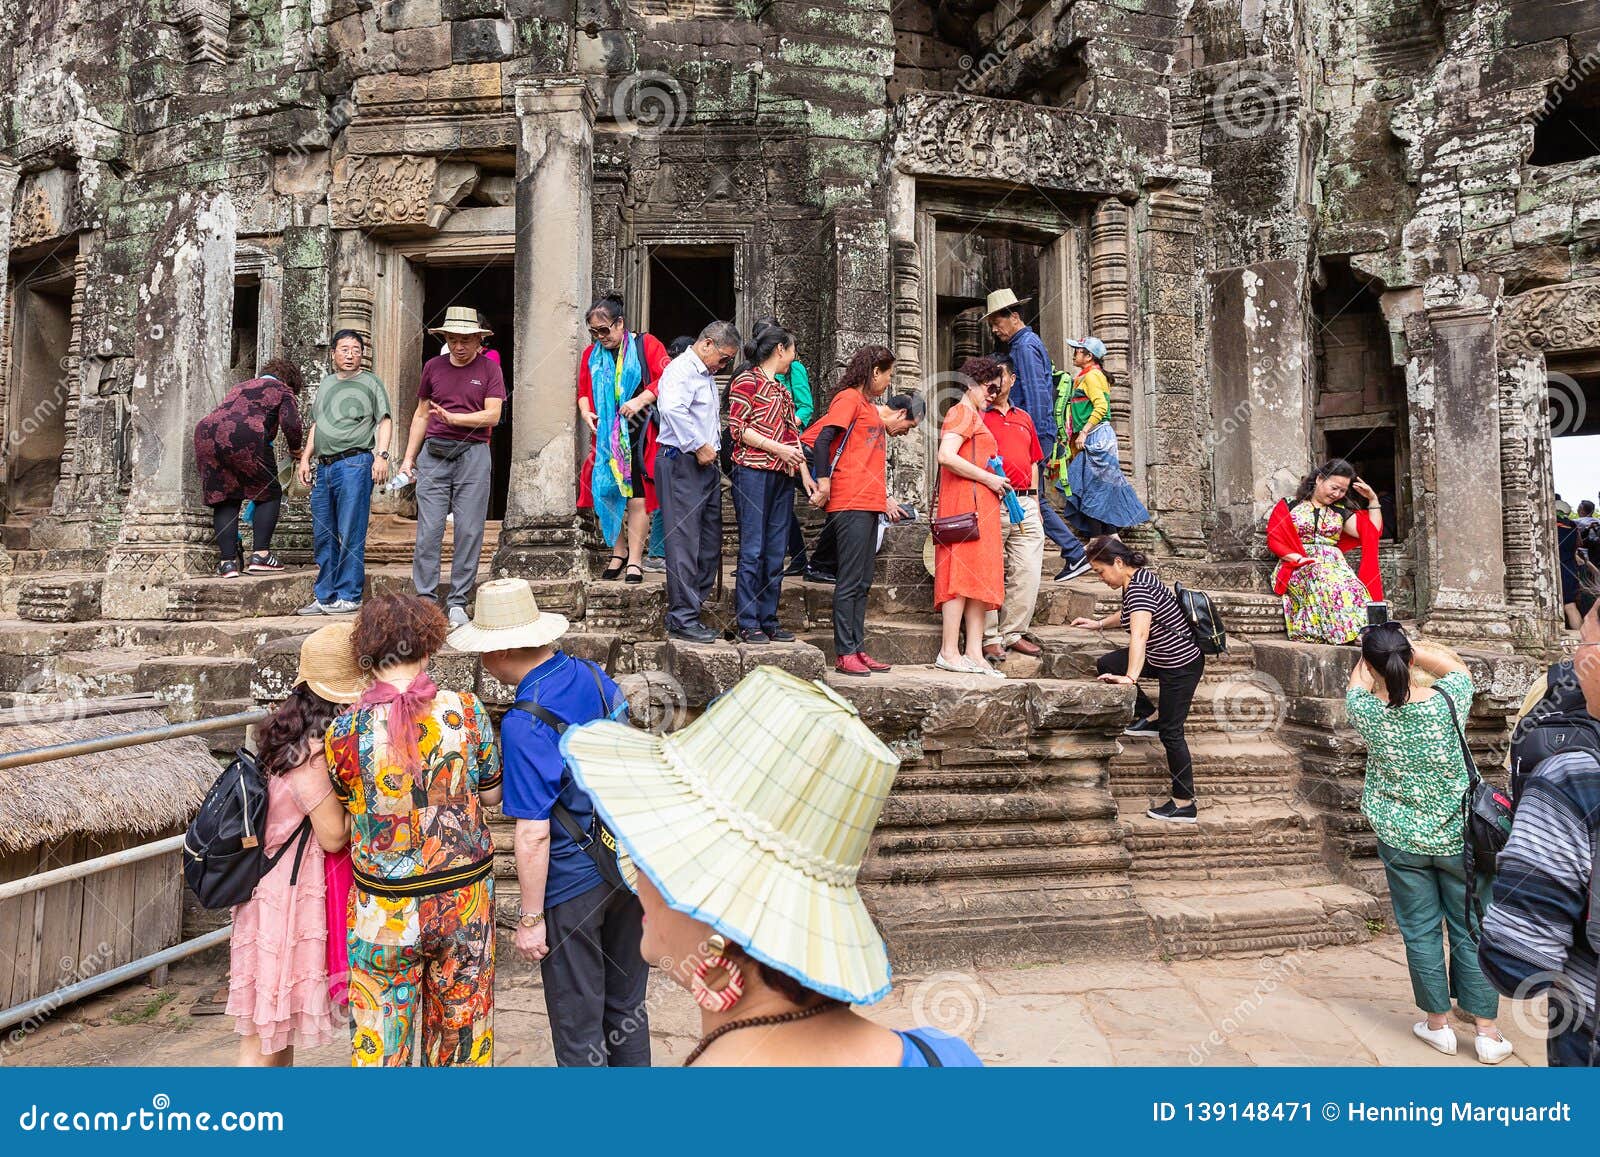 Tourists walk as they visit Angkor Wat temple in Siem Reap 